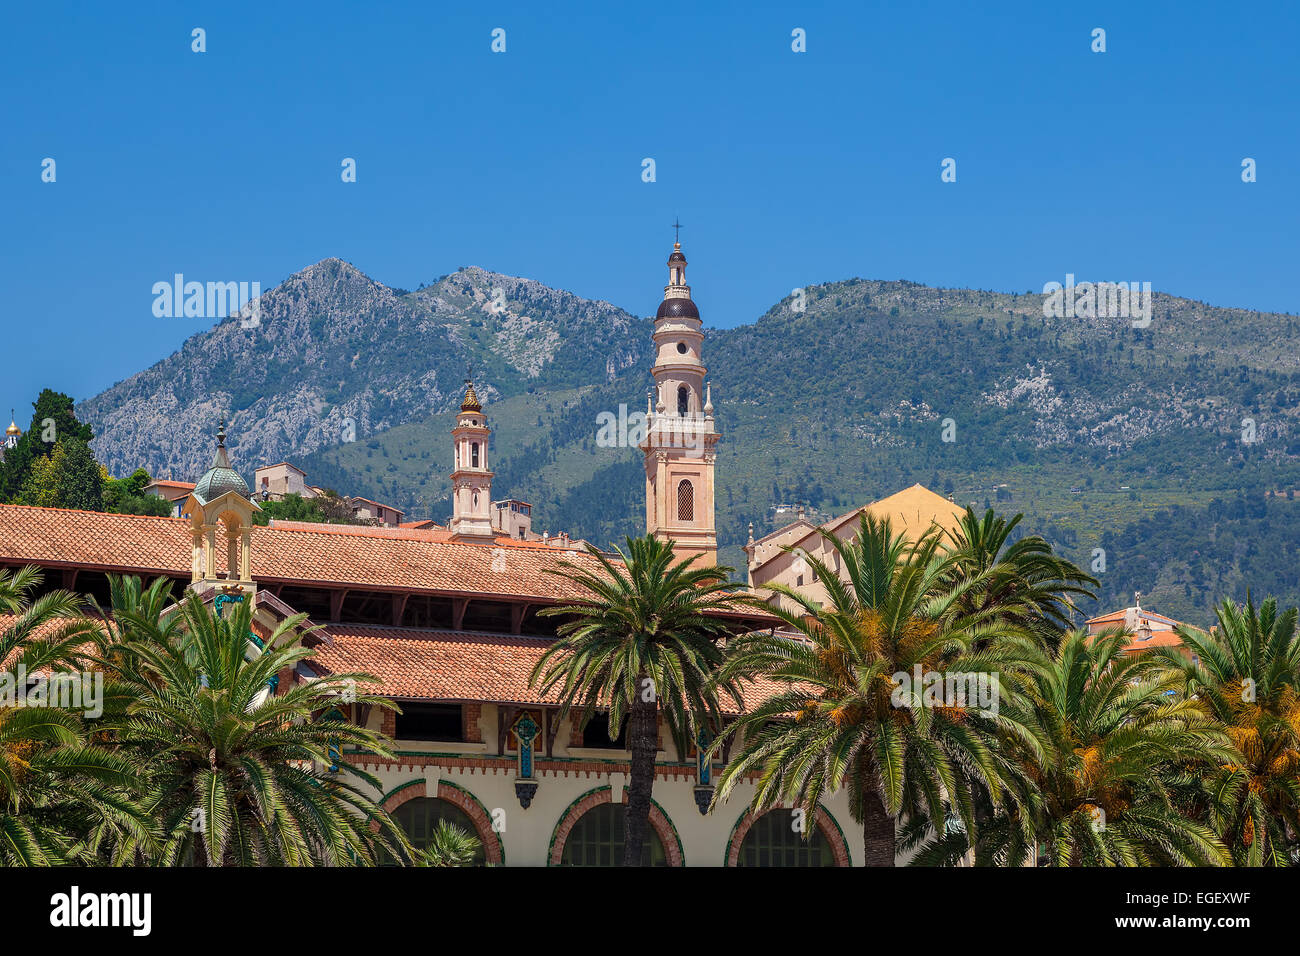 Catholic church bell tower among houses and palms and mountain on background under blue sky in Menton, France. Stock Photo